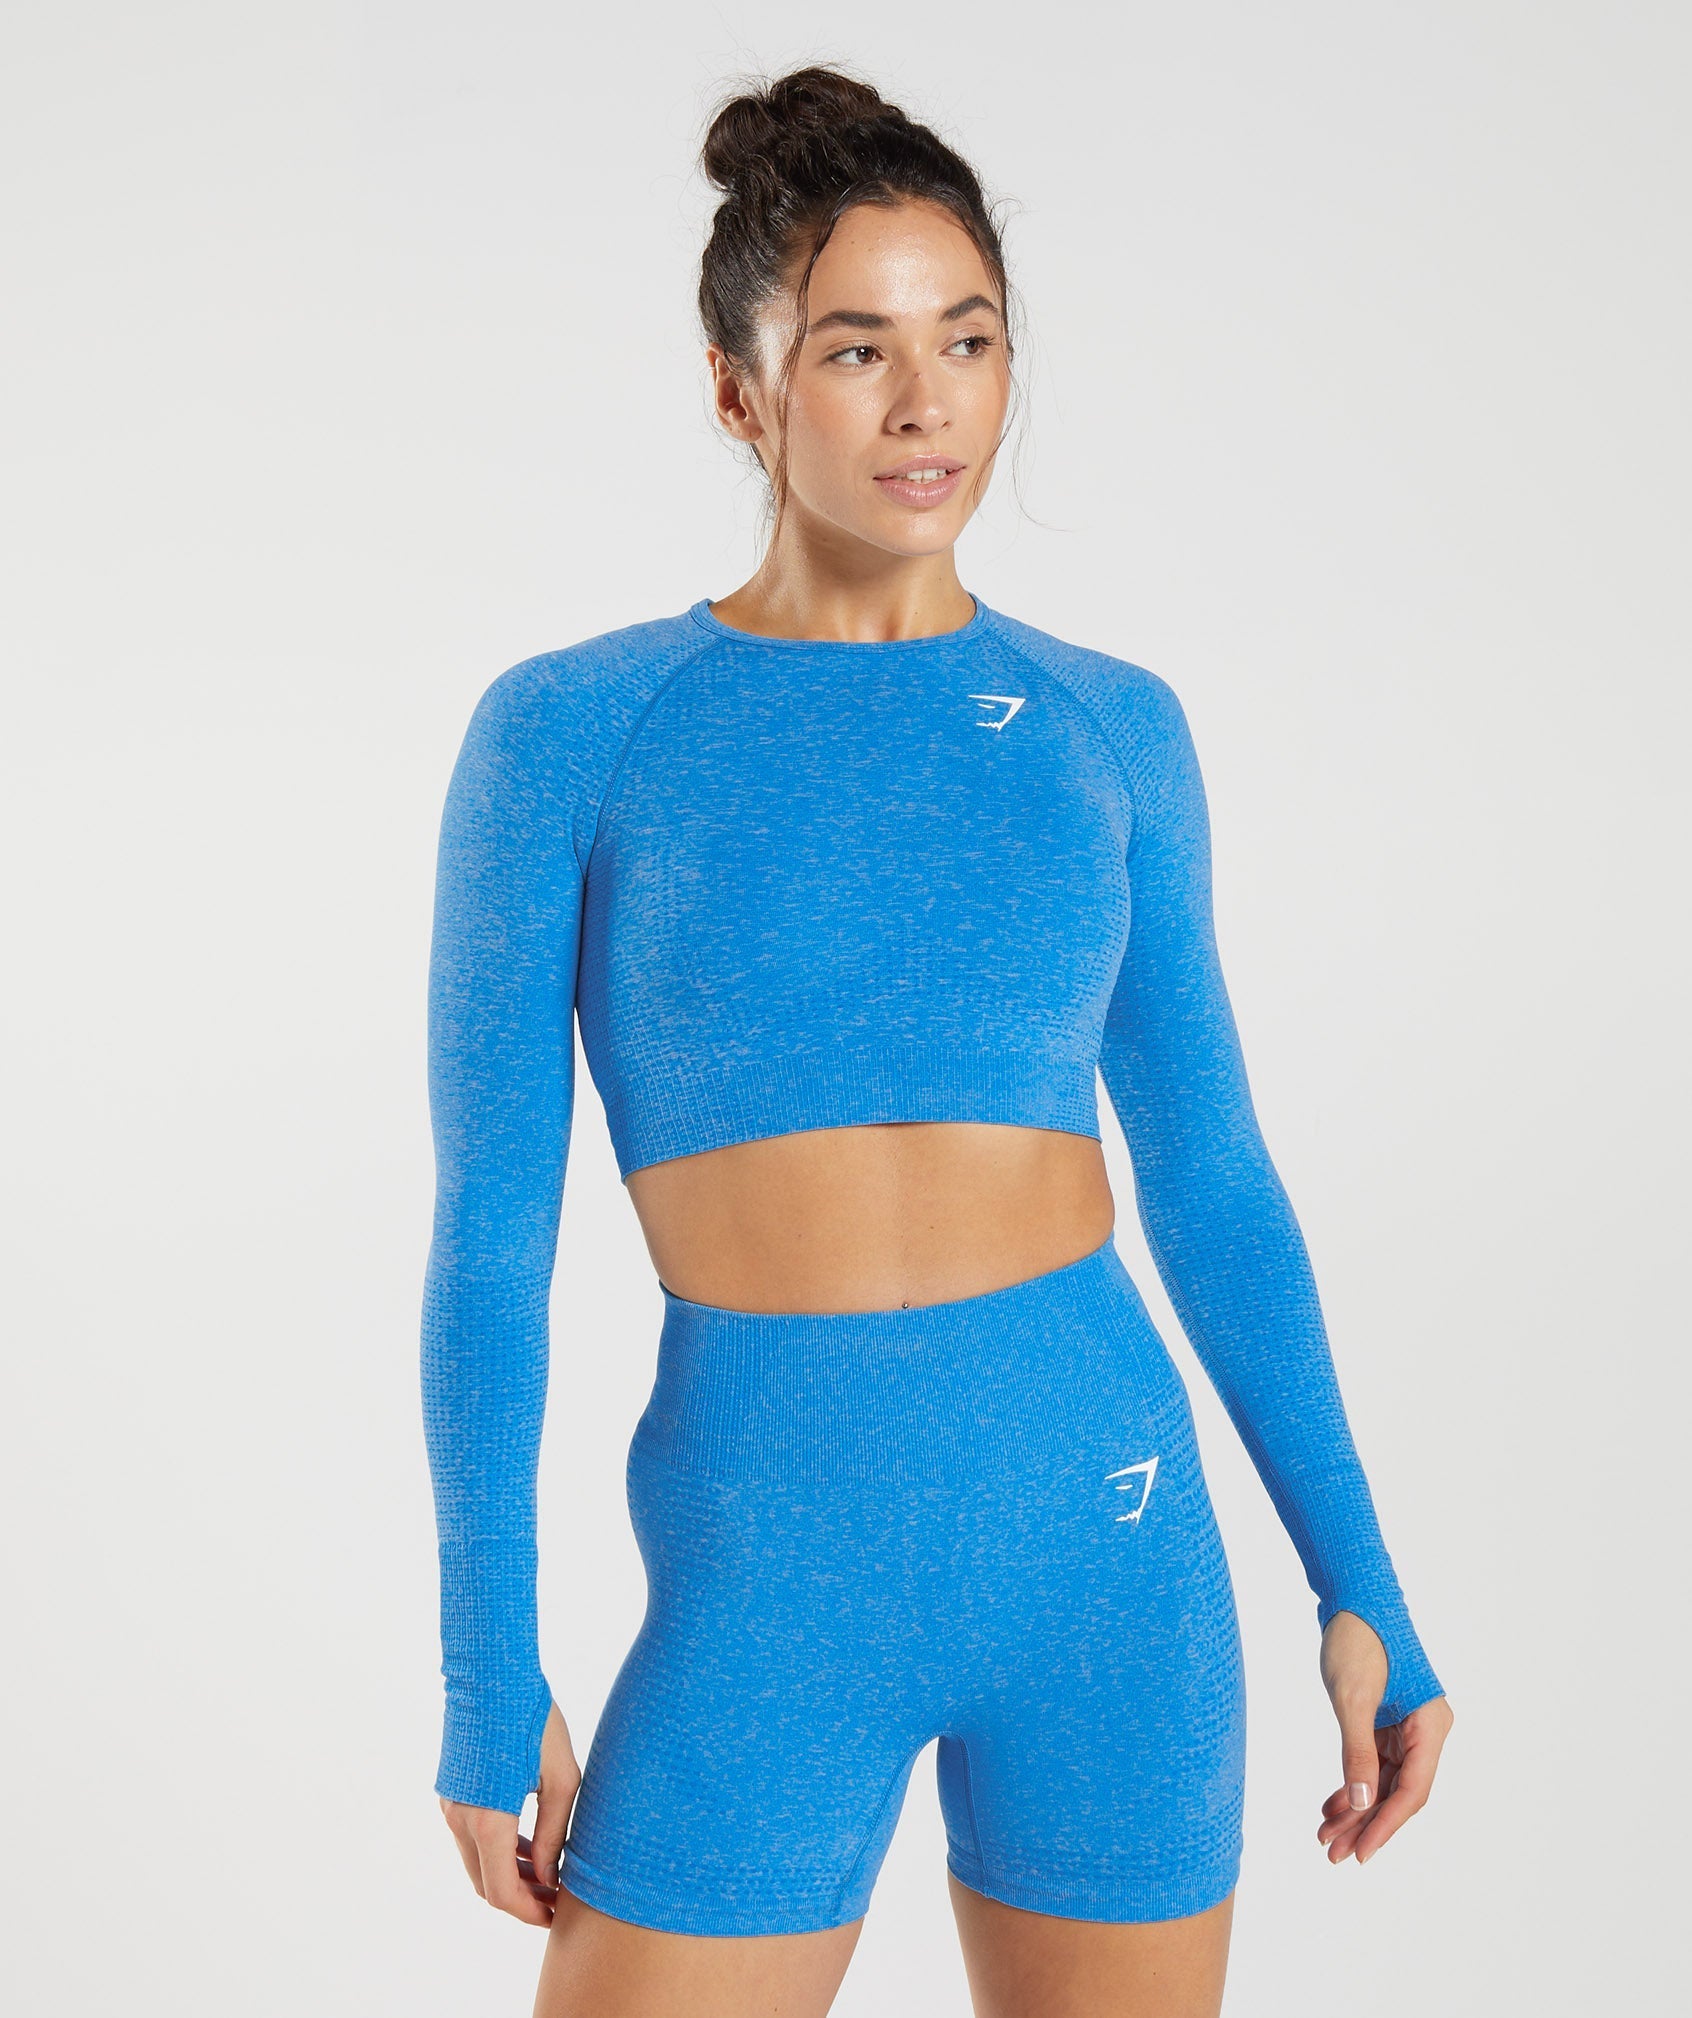 Vital Seamless 2.0 Long Sleeve Crop Top in {{variantColor} is out of stock